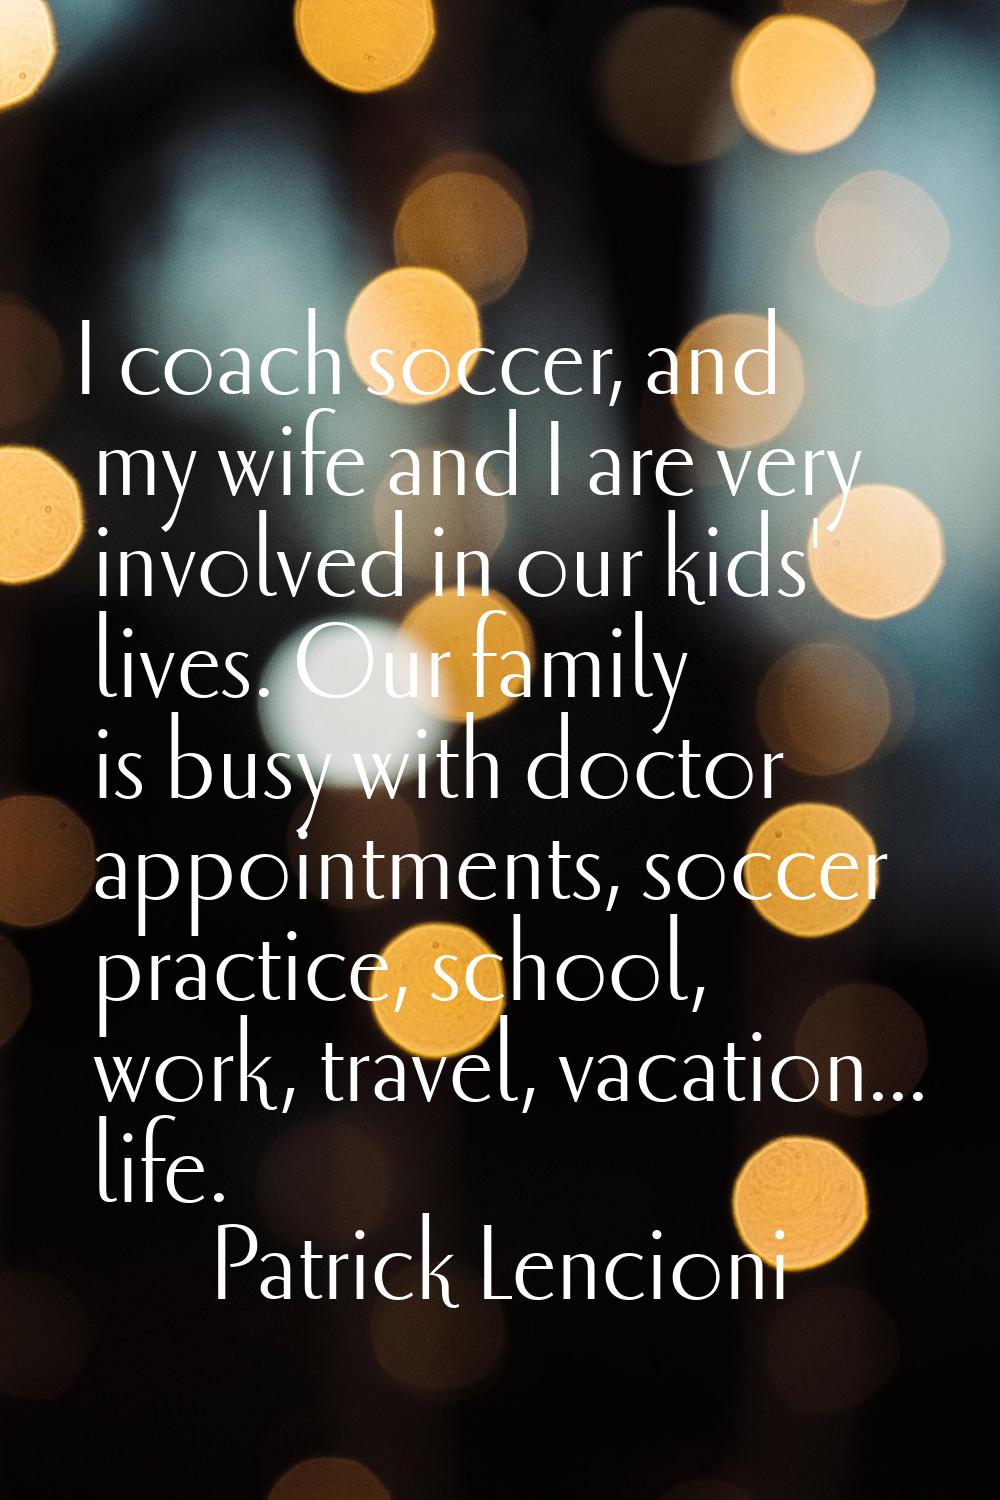 I coach soccer, and my wife and I are very involved in our kids' lives. Our family is busy with doc